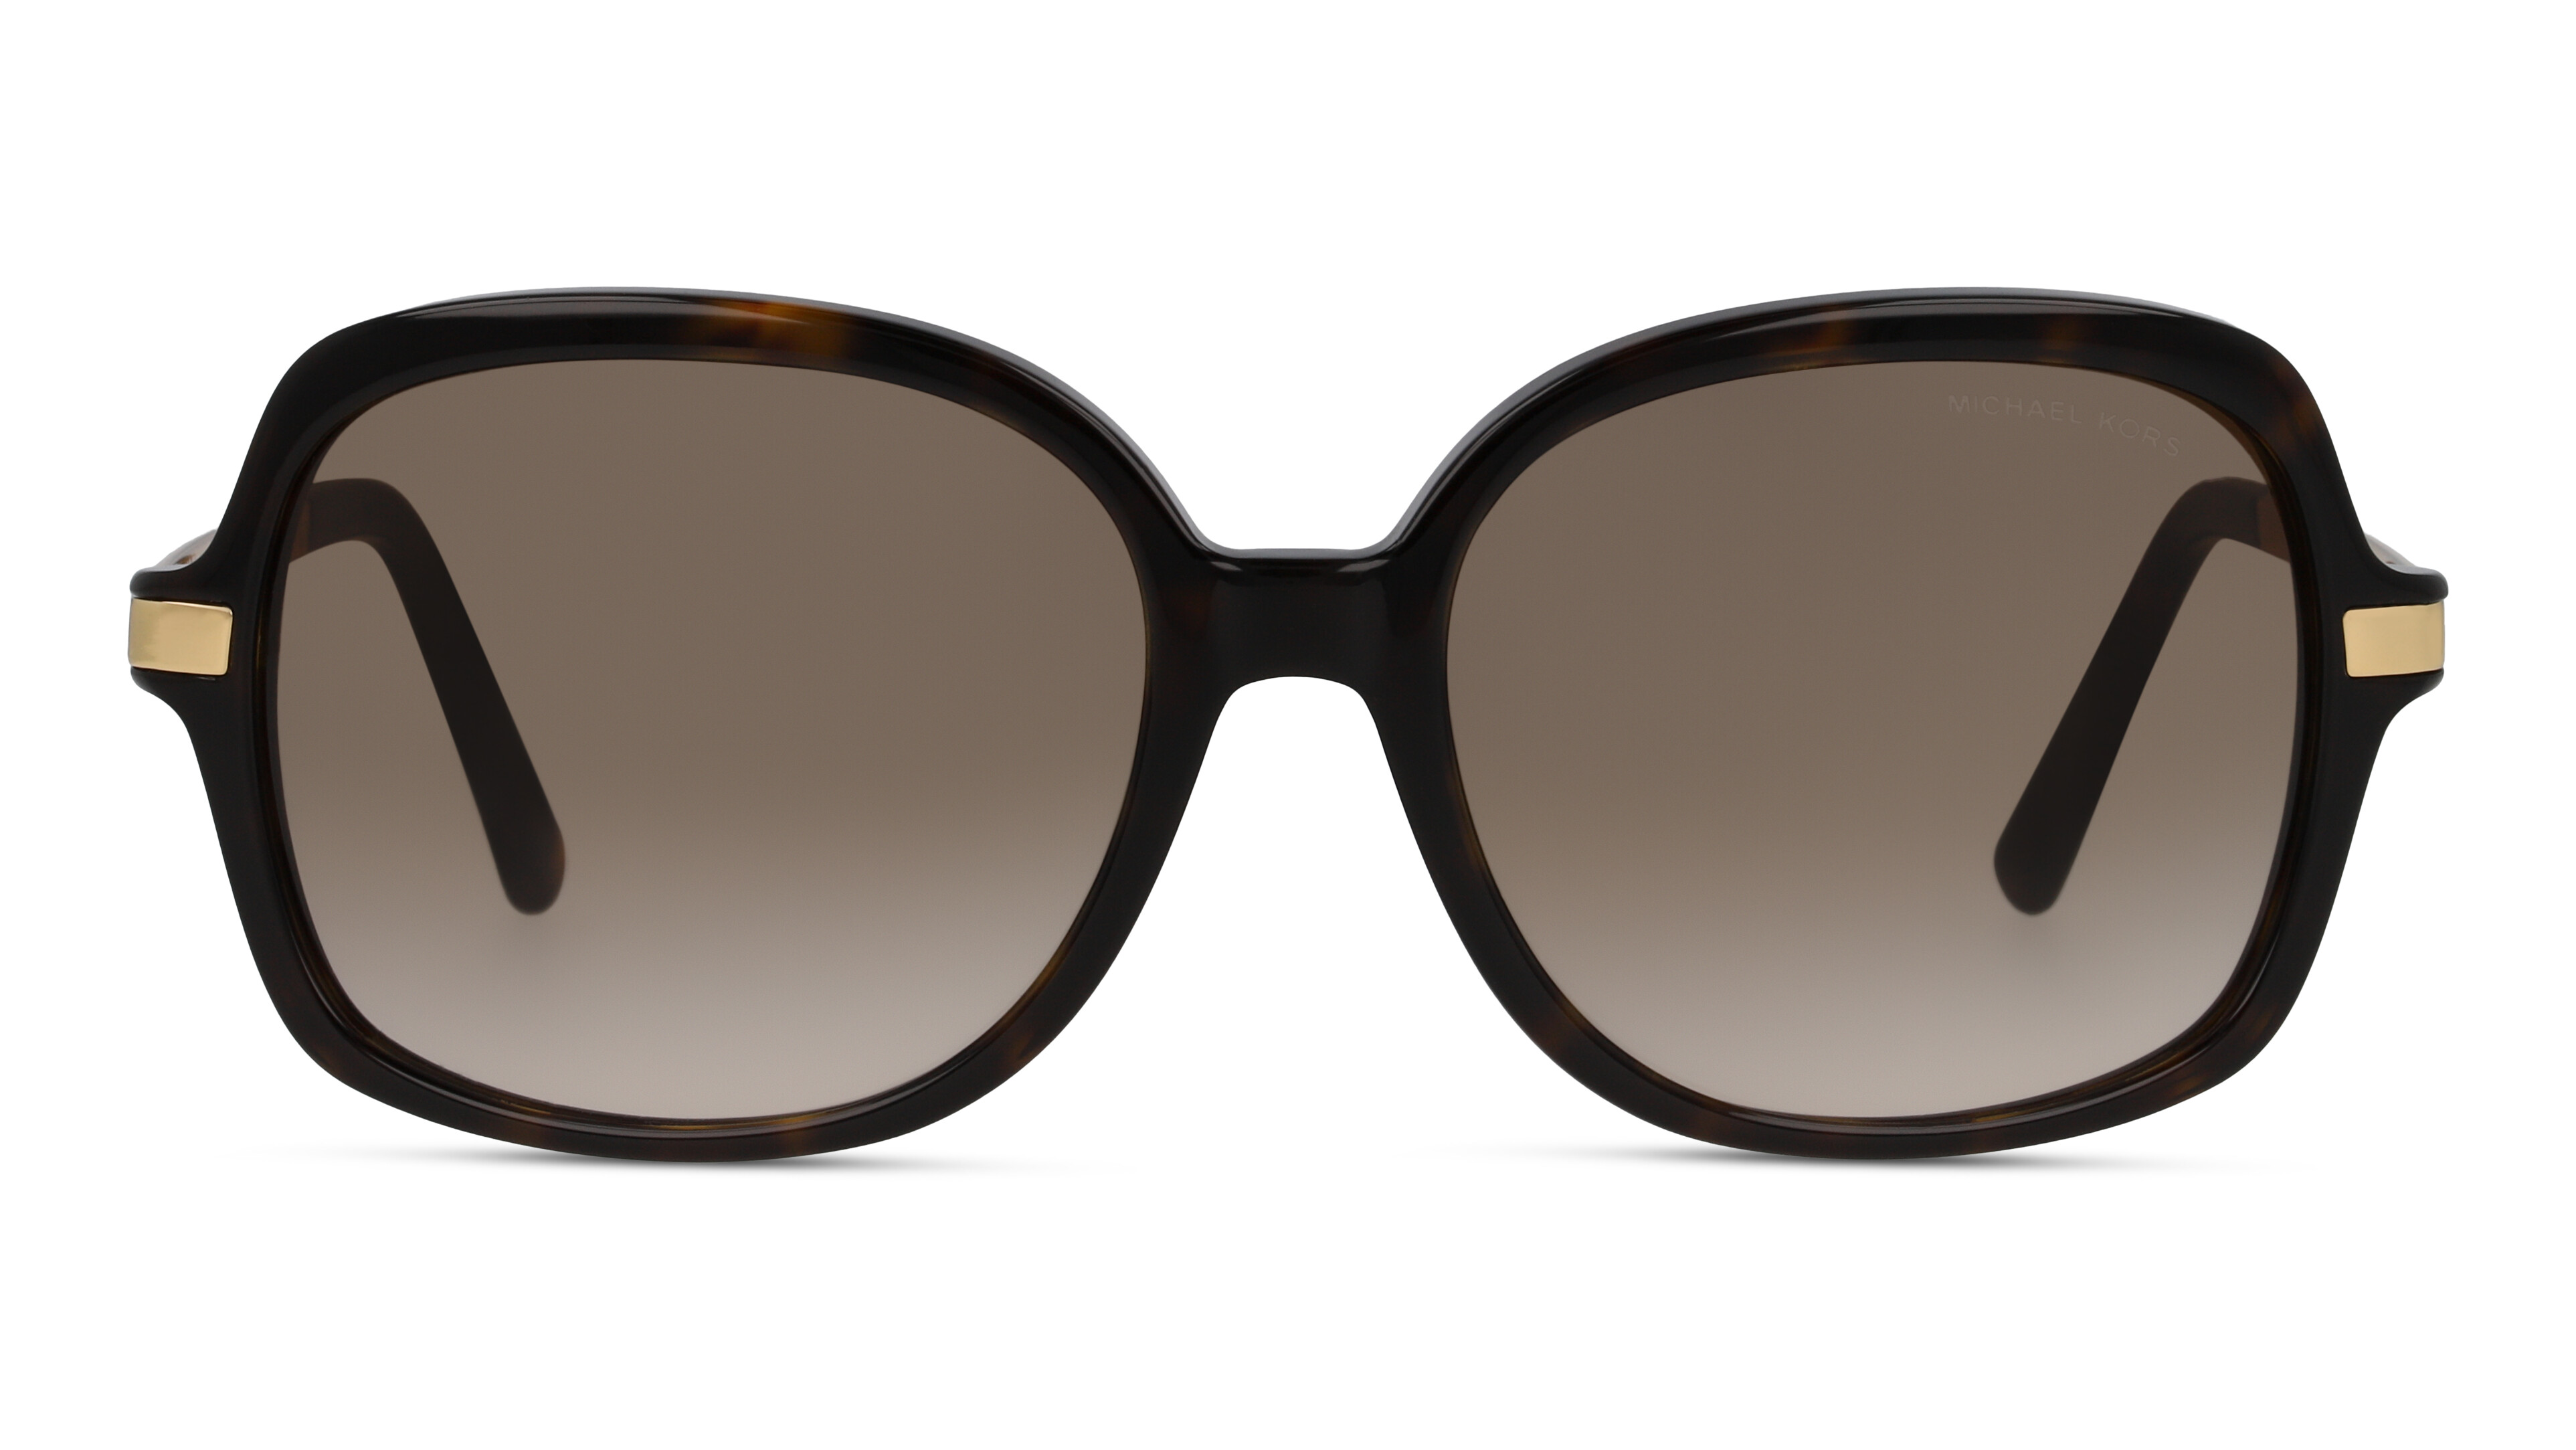 [products.image.front] Michael Kors ADRIANNA II 0MK2024 310613 Sonnenbrille